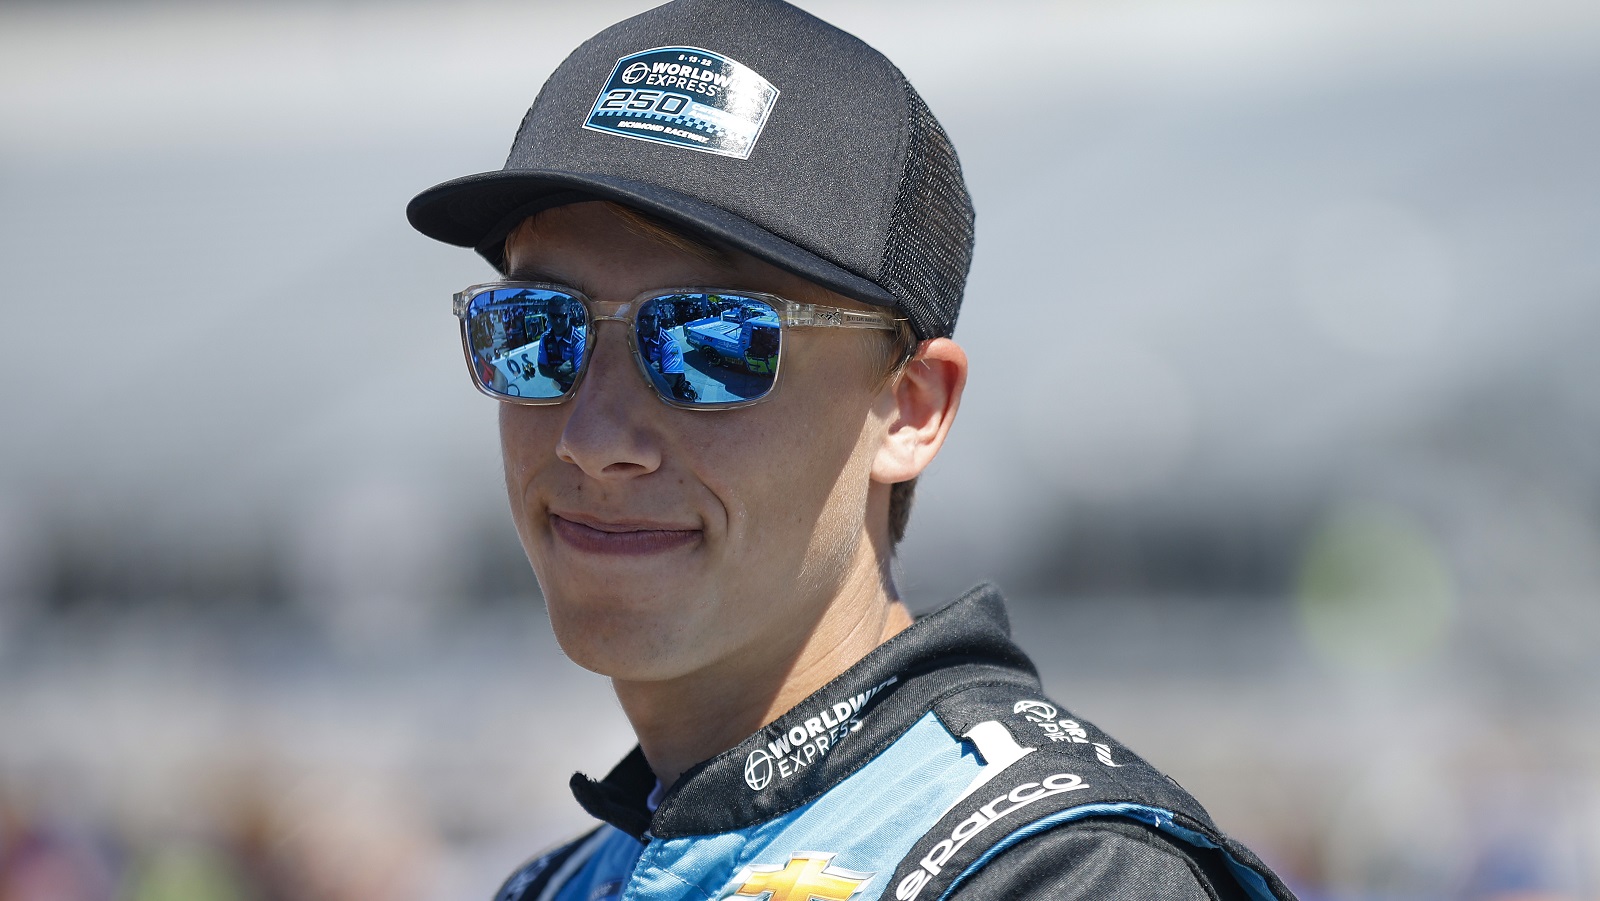 Carson Hocevar waits on the grid during practice for the NASCAR Camping World Truck Series Worldwide Express 250 for Carrier Appreciation at Richmond Raceway on Aug. 13, 2022.